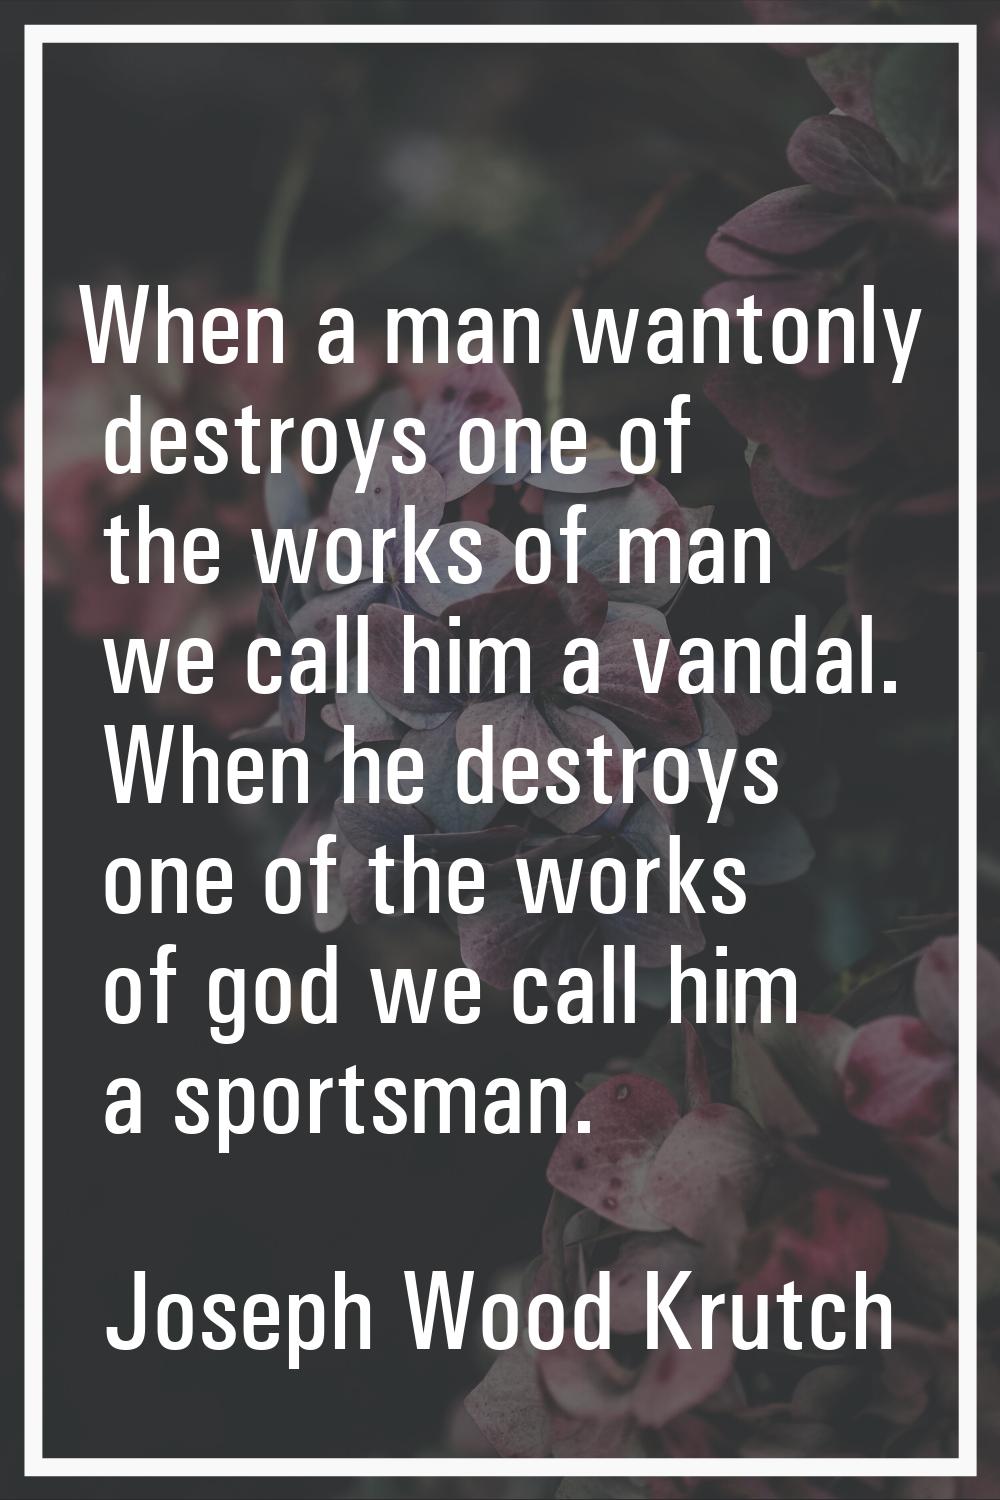 When a man wantonly destroys one of the works of man we call him a vandal. When he destroys one of 